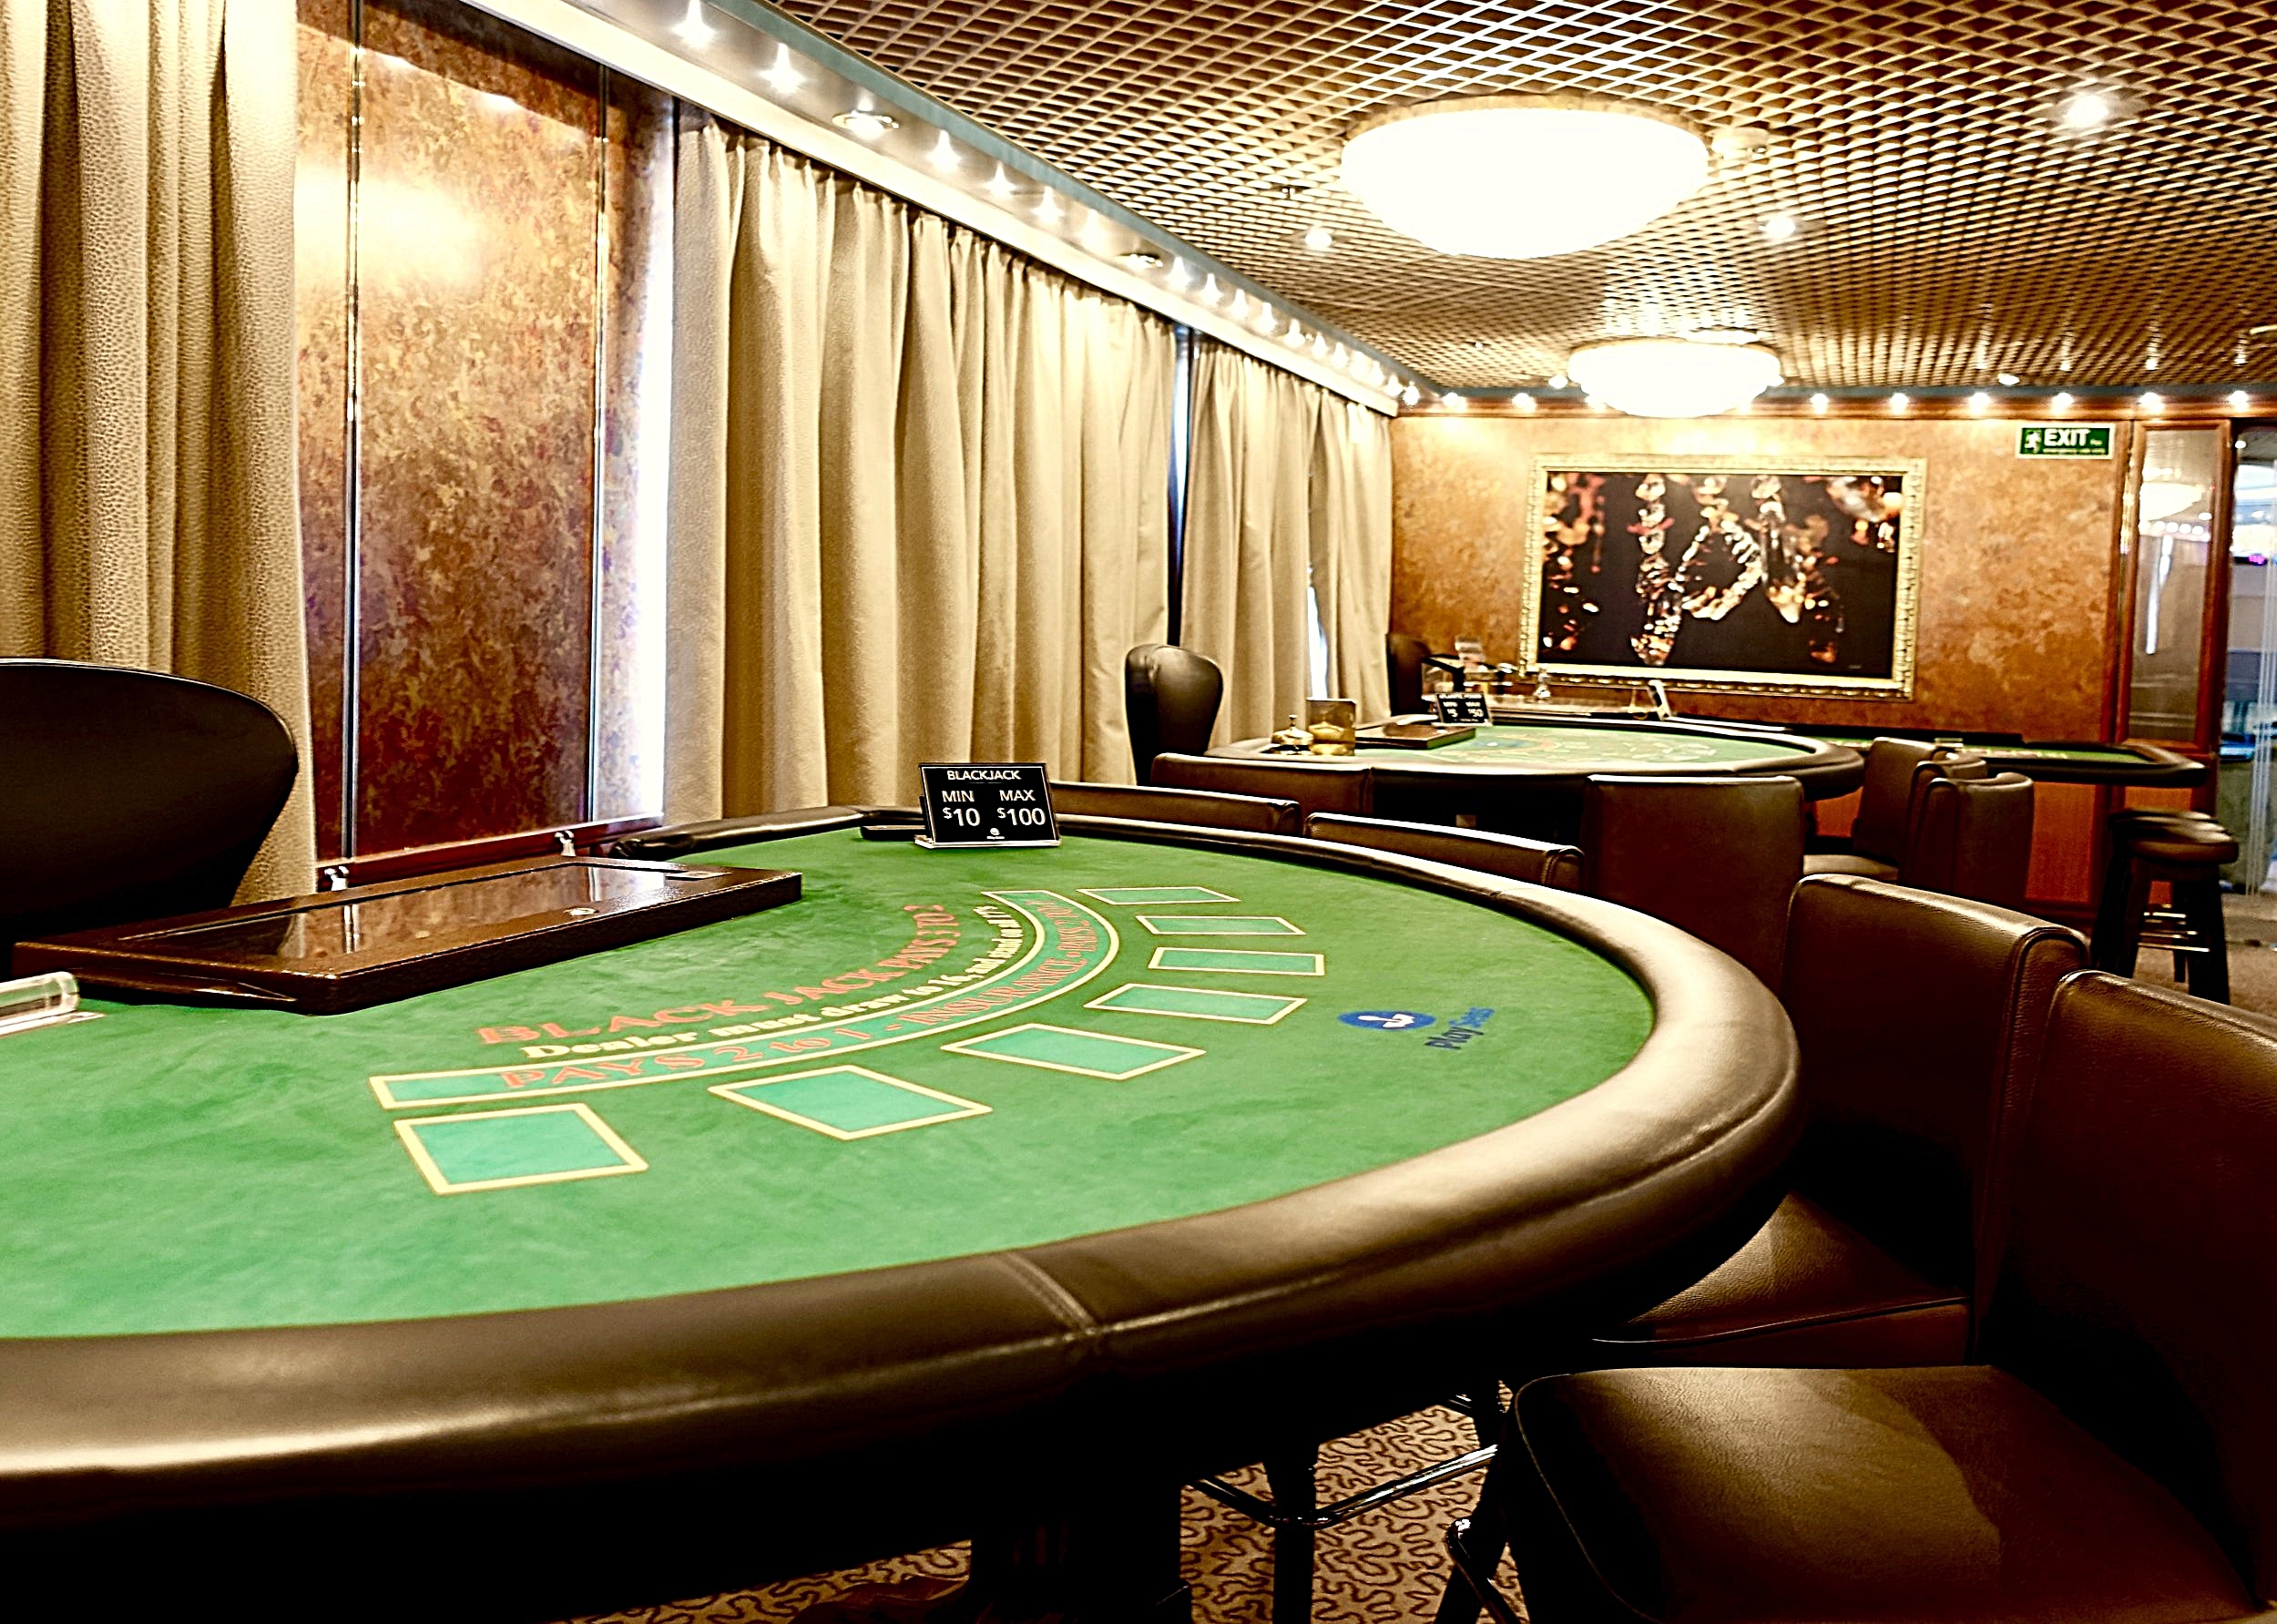  The Casino card tables. 